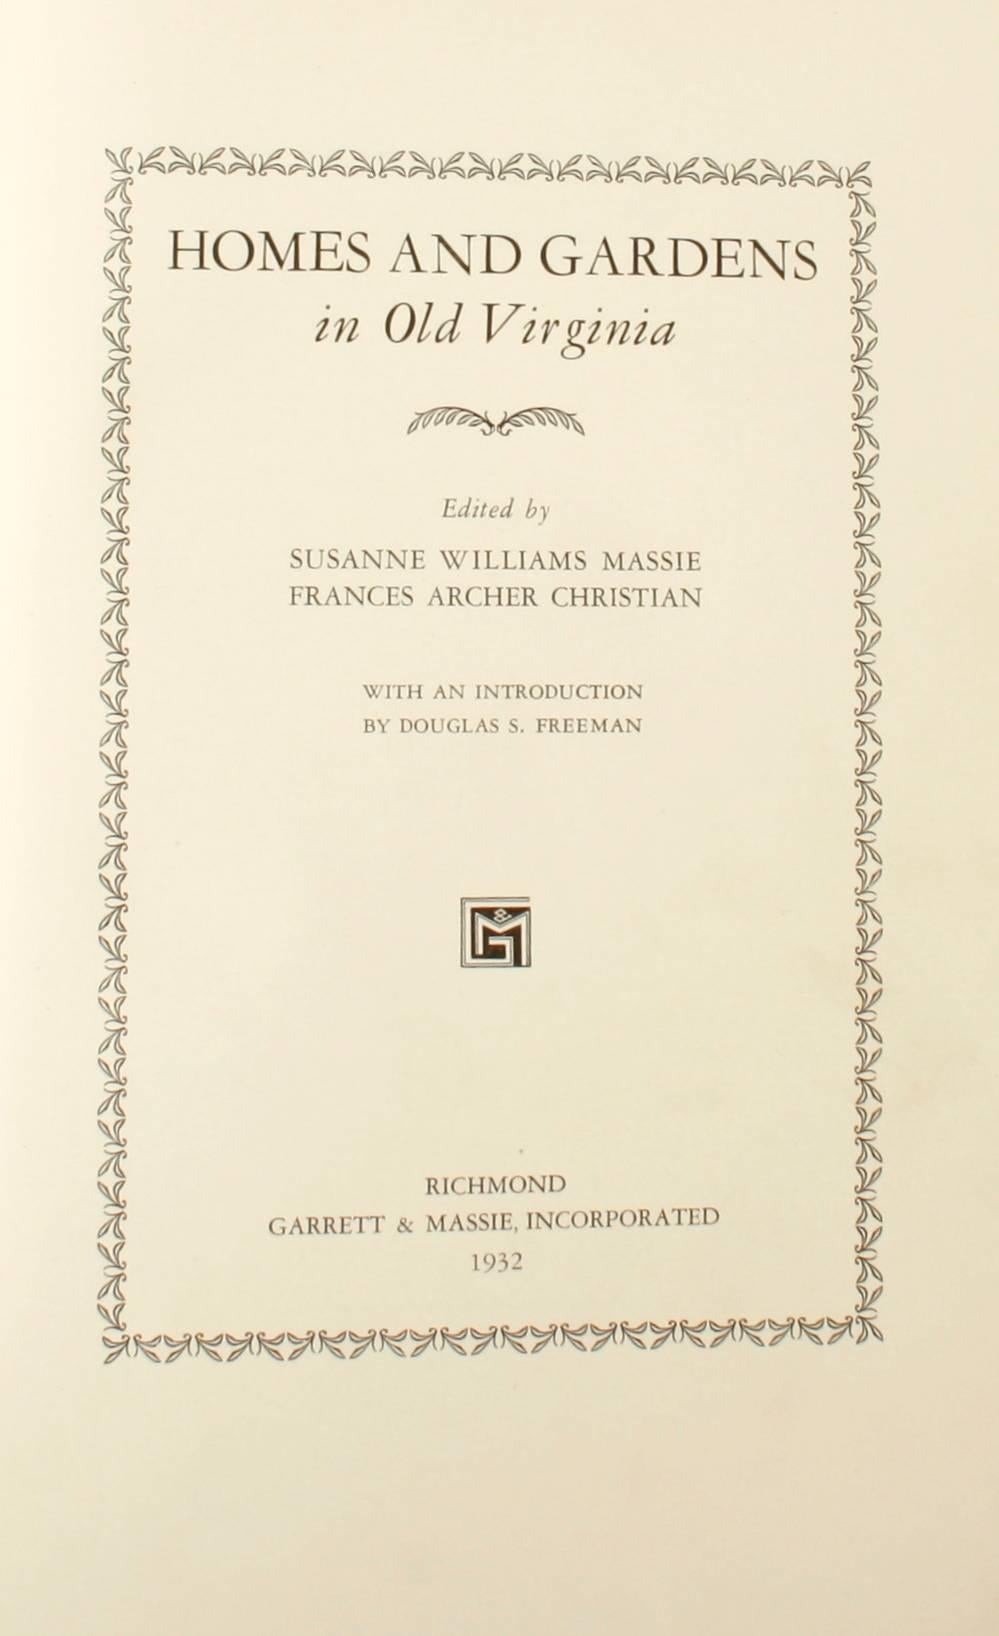 Homes and Gardens in Old Virginia. Richmond: Garrett and Massie, Incorporated, 1932. 2nd Ed hardcover with no dust jacket. 367 pp. The 1st edition was a guide book by the editors of Homes and Gardens in Old Virginia published for tourists who wanted